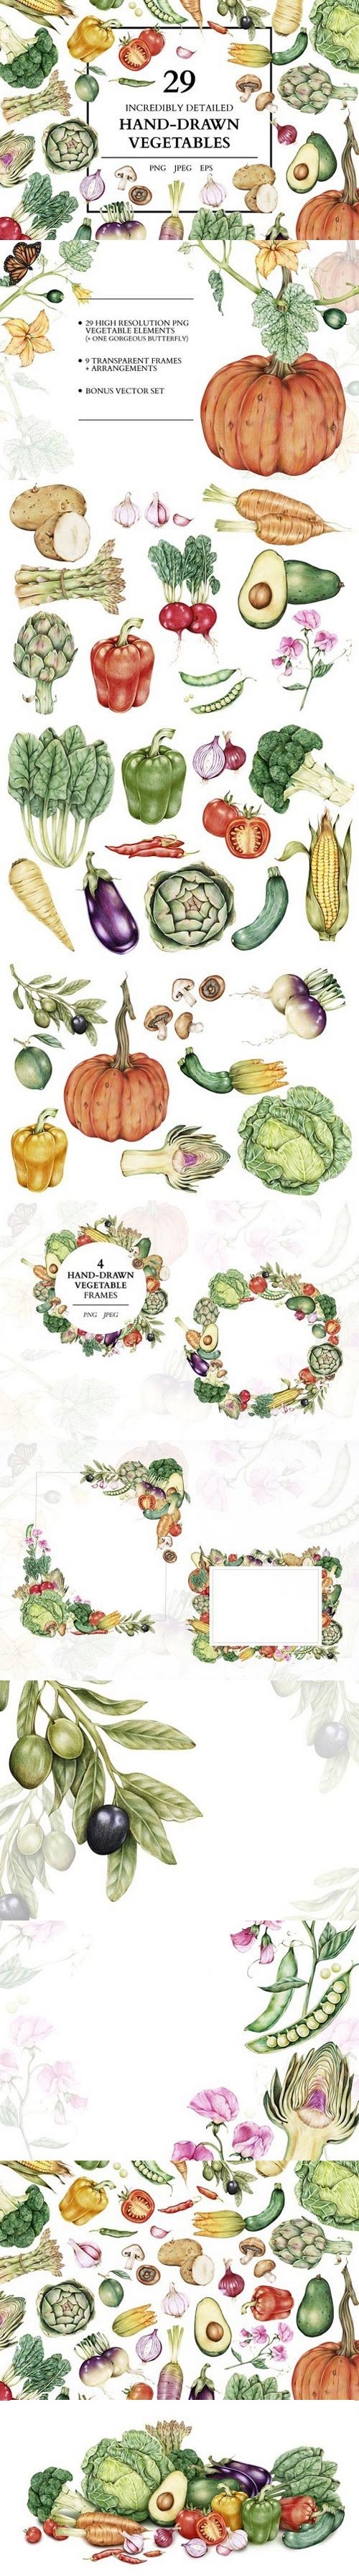 29 Incredible hand-drawn vegetables 1734414